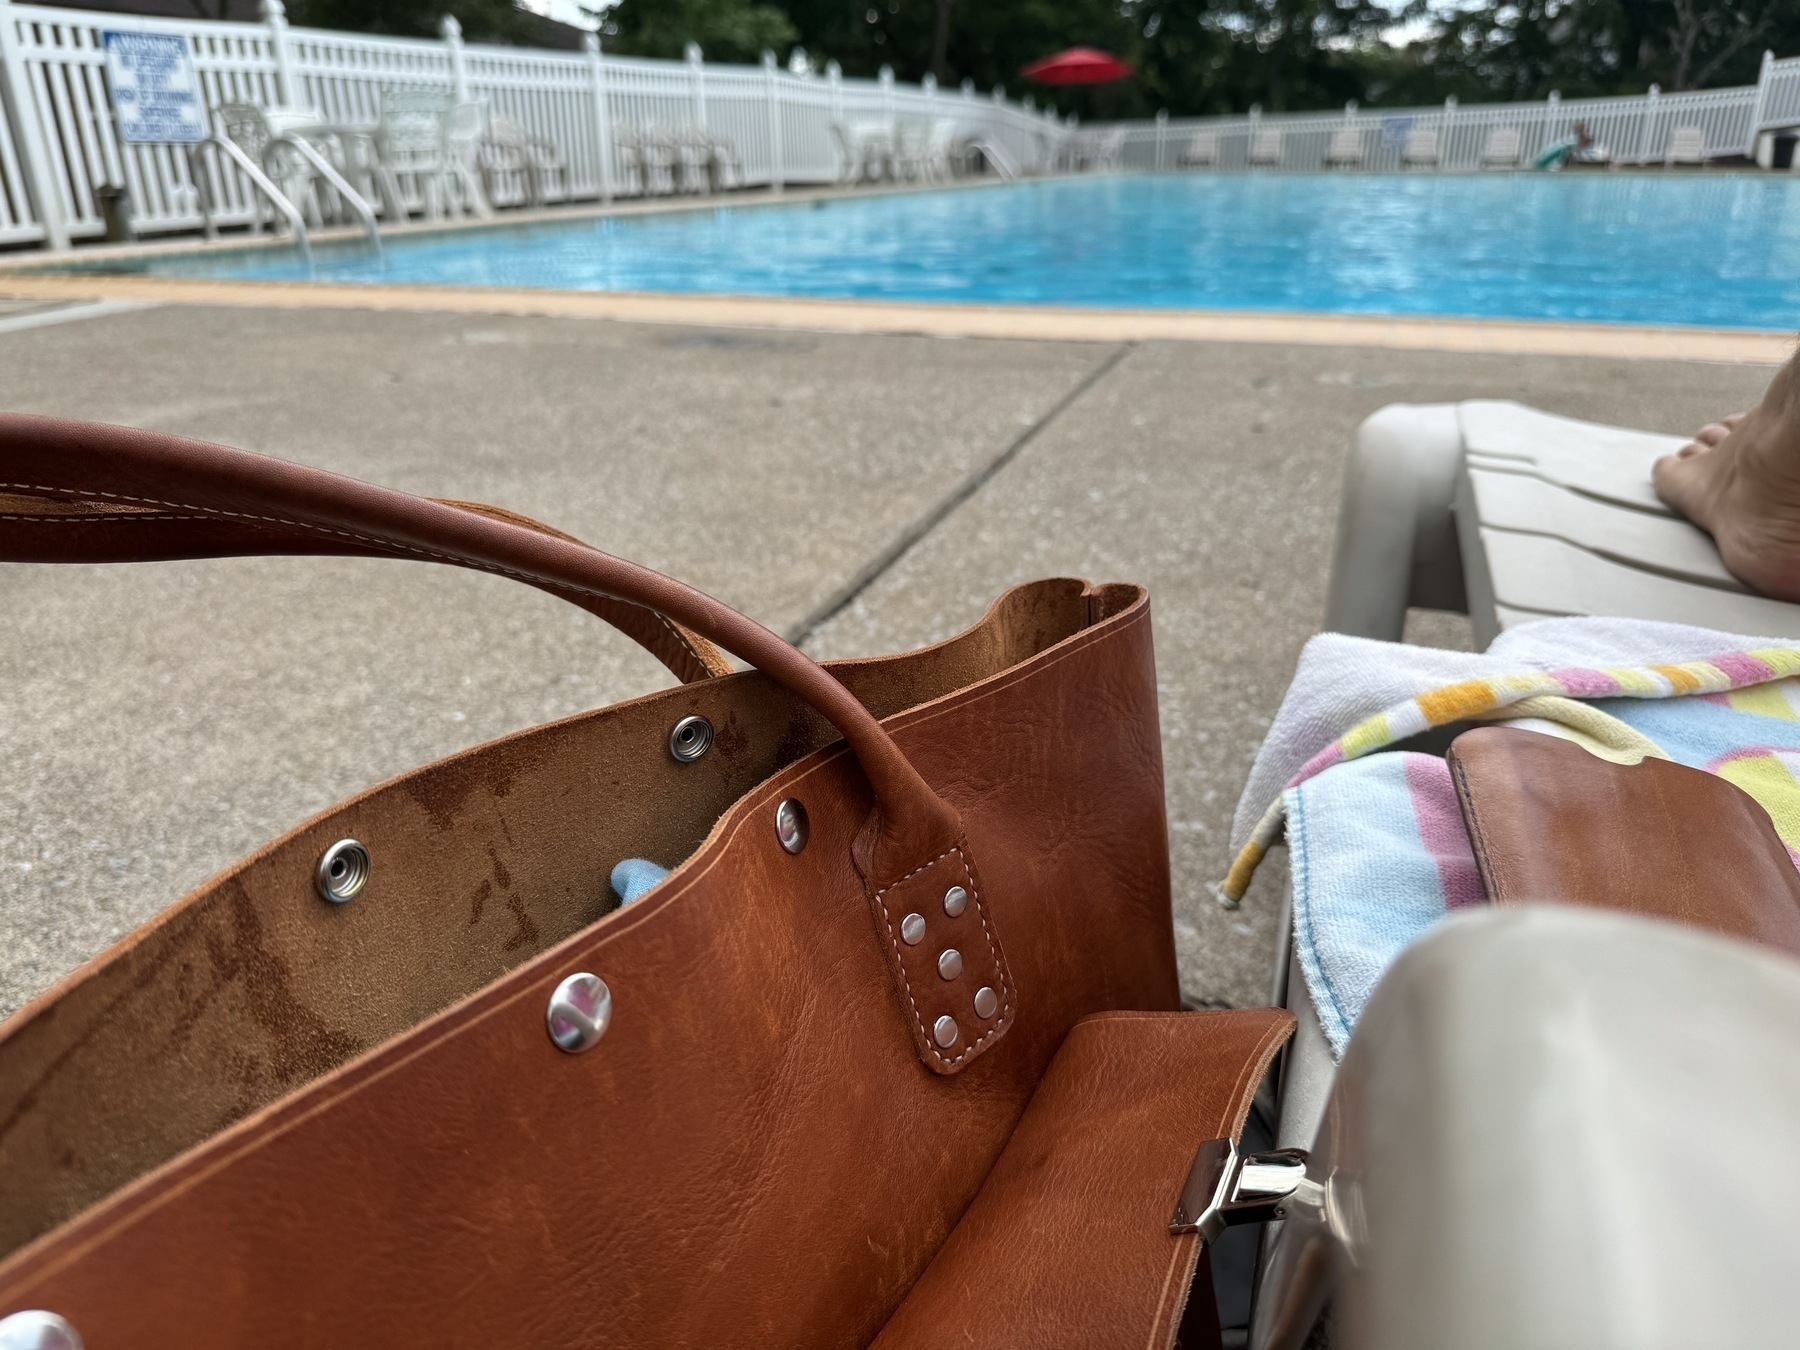 Person sitting by a pool with a brown leather bag next to them.